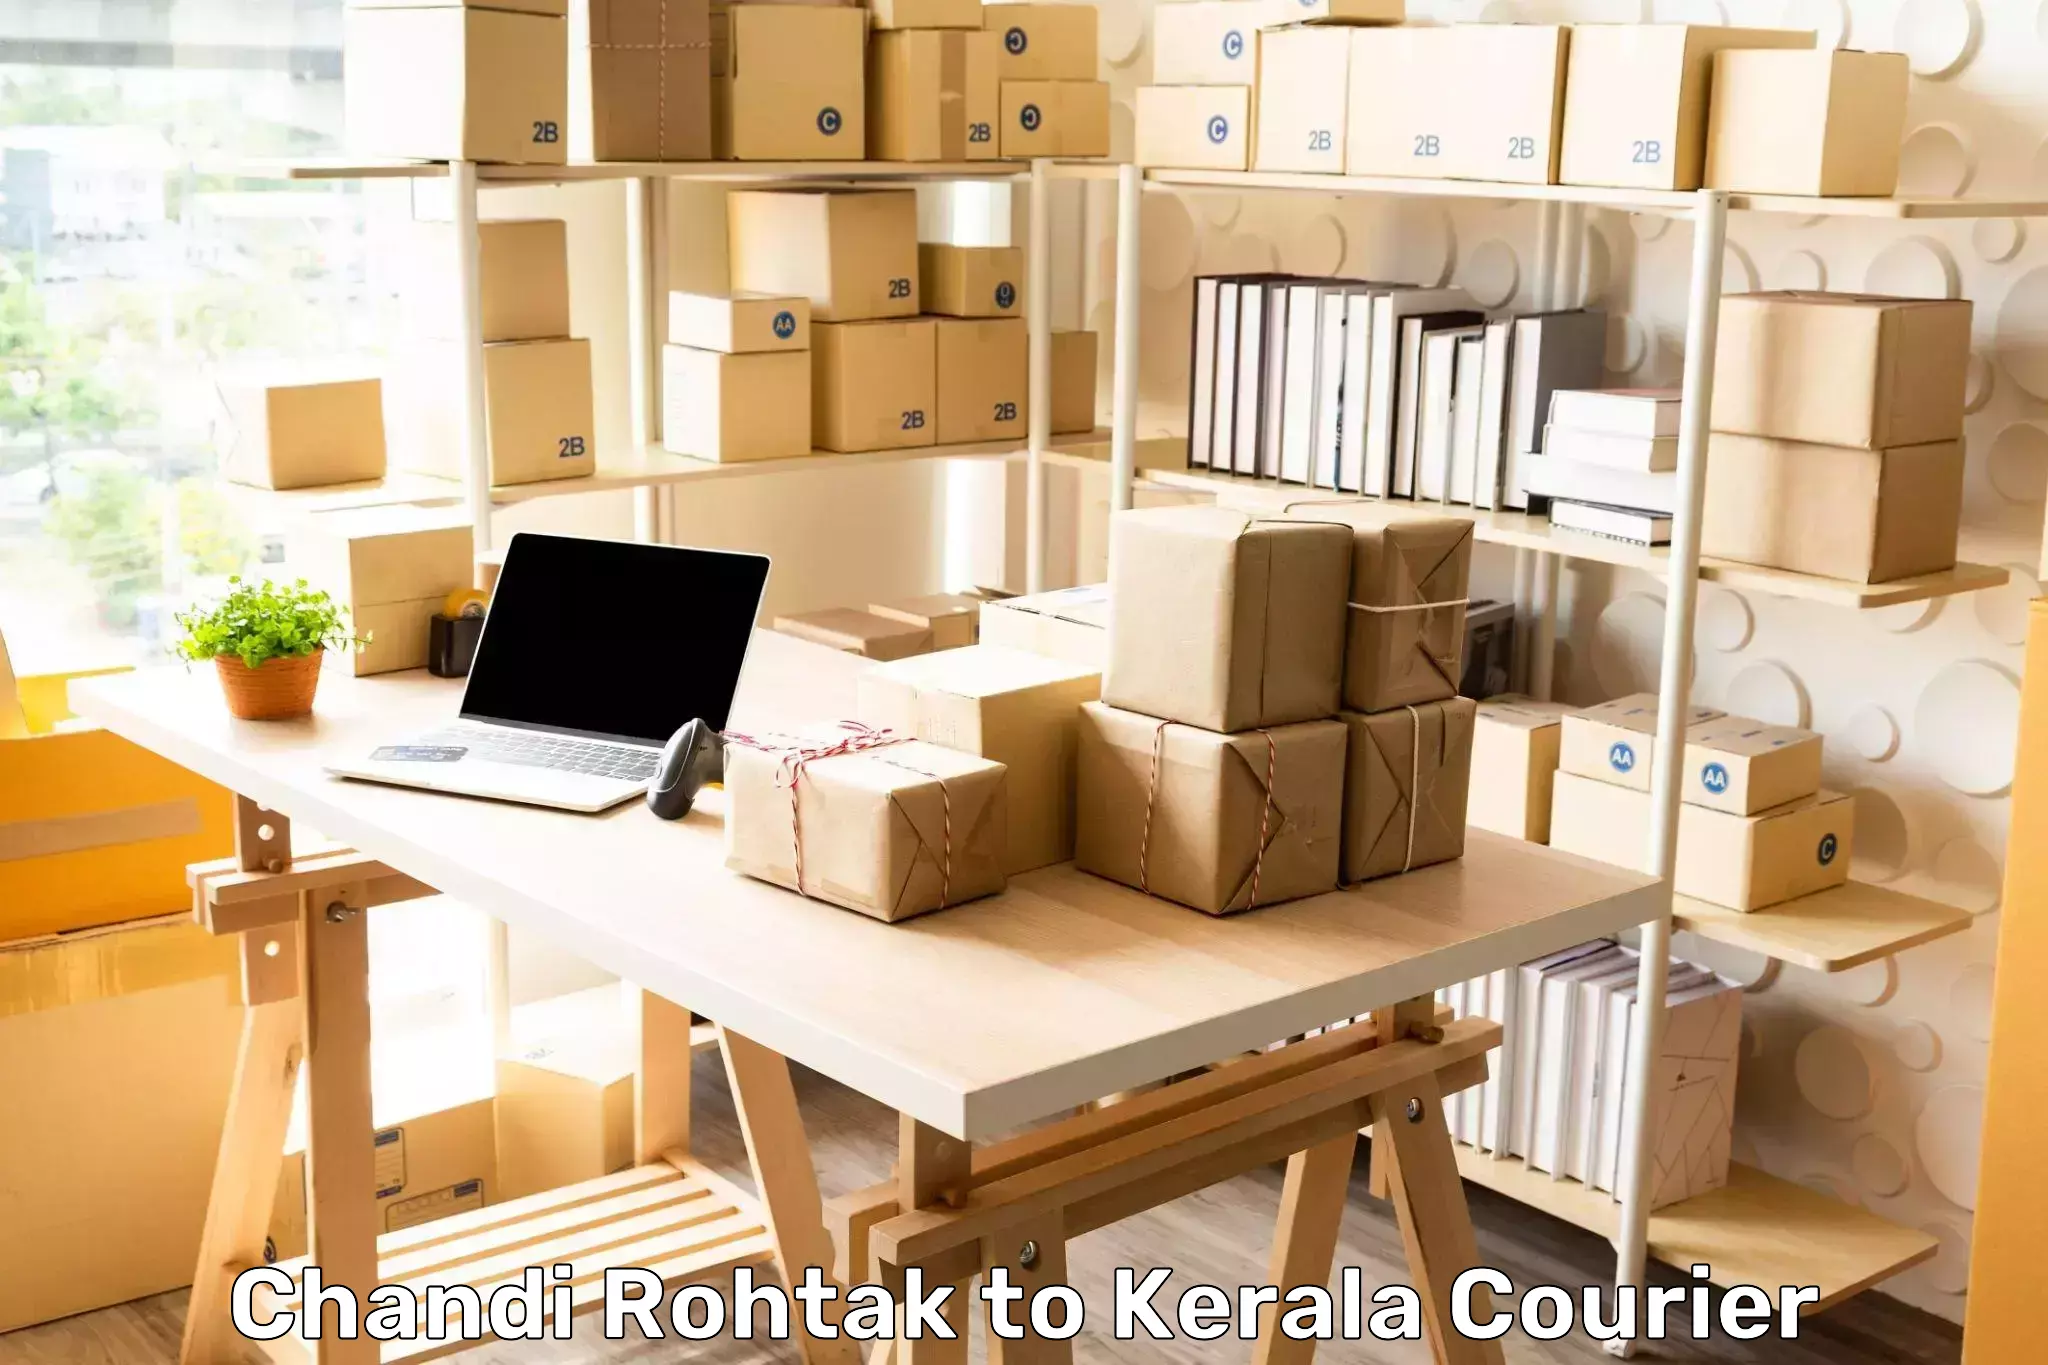 Full-service courier options Chandi Rohtak to Valanchery